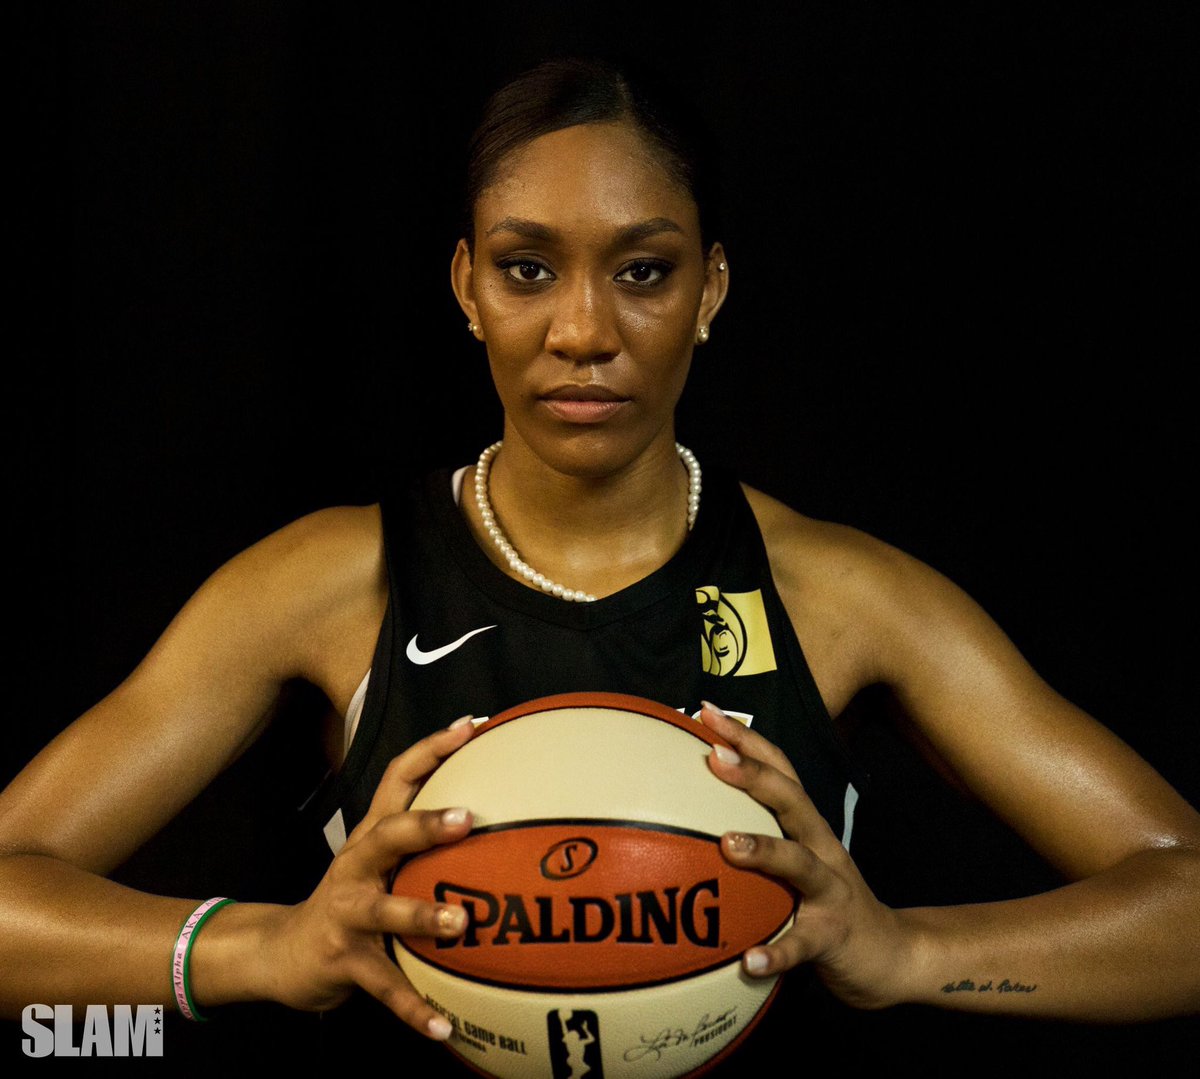 ...but since we’re here, know that the No. 1 pick in the 2018 WNBA Draft was no other than the University of South Carolina’s own, A'ja Wilson!A’ja was born in Hopkins, SC and a lifelong resident of Richland County before being drafted to the Las Vegas Aces